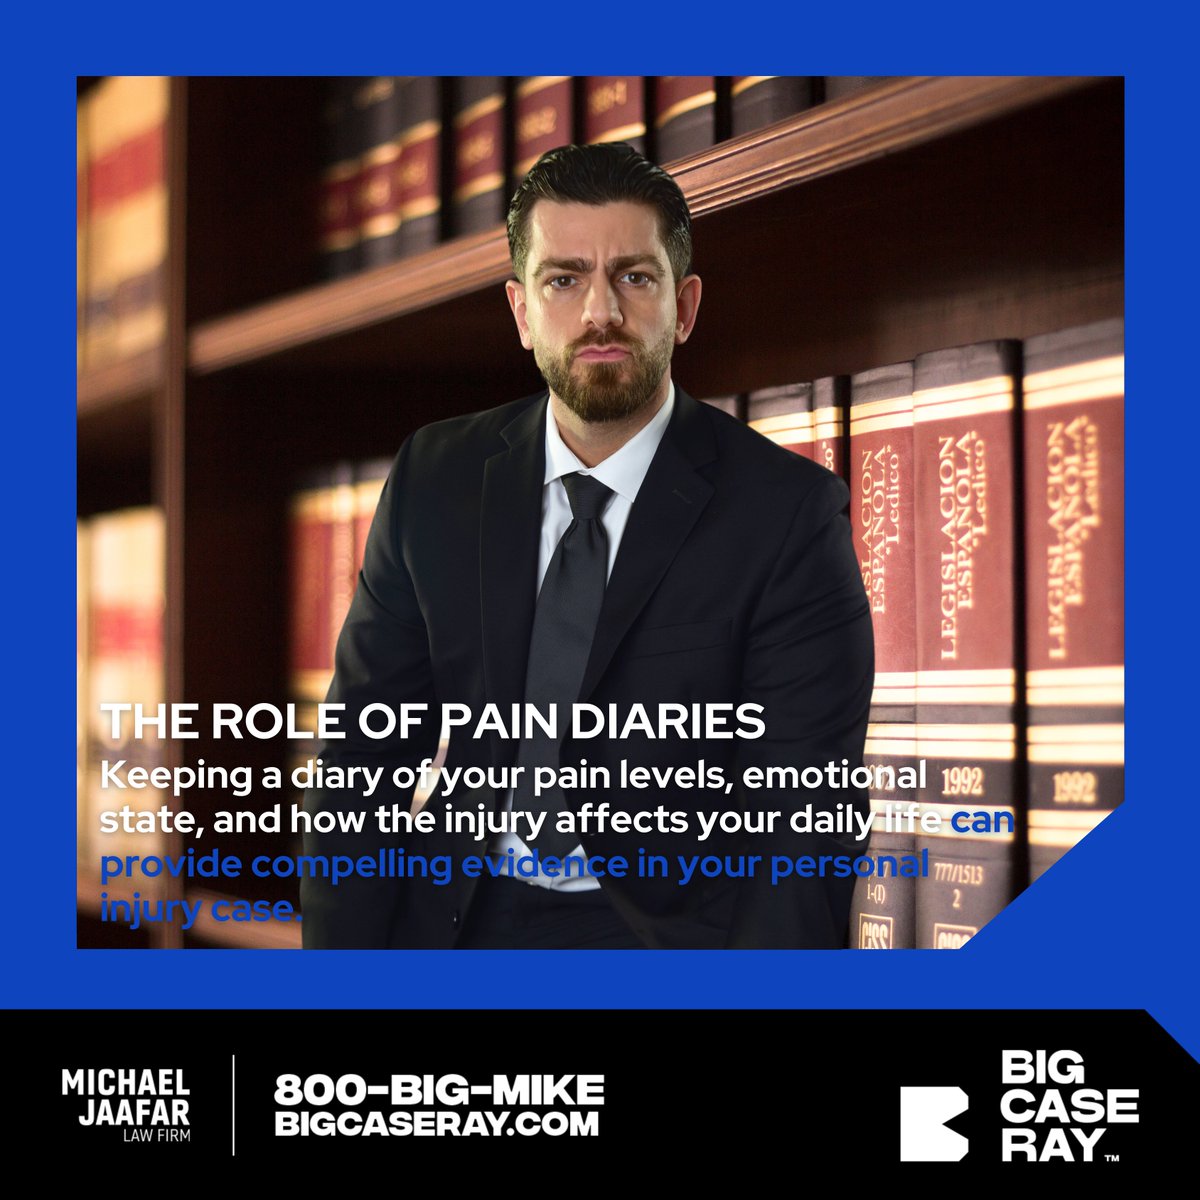 BIG CASE RAY
'The Role of Pain Diaries'
Personal Injury Facts. 💡
.
.
.
.
.
#bigcaseray #rayrahal #mikejaafar #bigmike #800bigmike #personalinjury #personalinjurylawyer
#injuryattorney
#accidentlawyer
#legalhelp
#injured
#compensation
#justice
#personalinjuryclaim
#lawyerlife